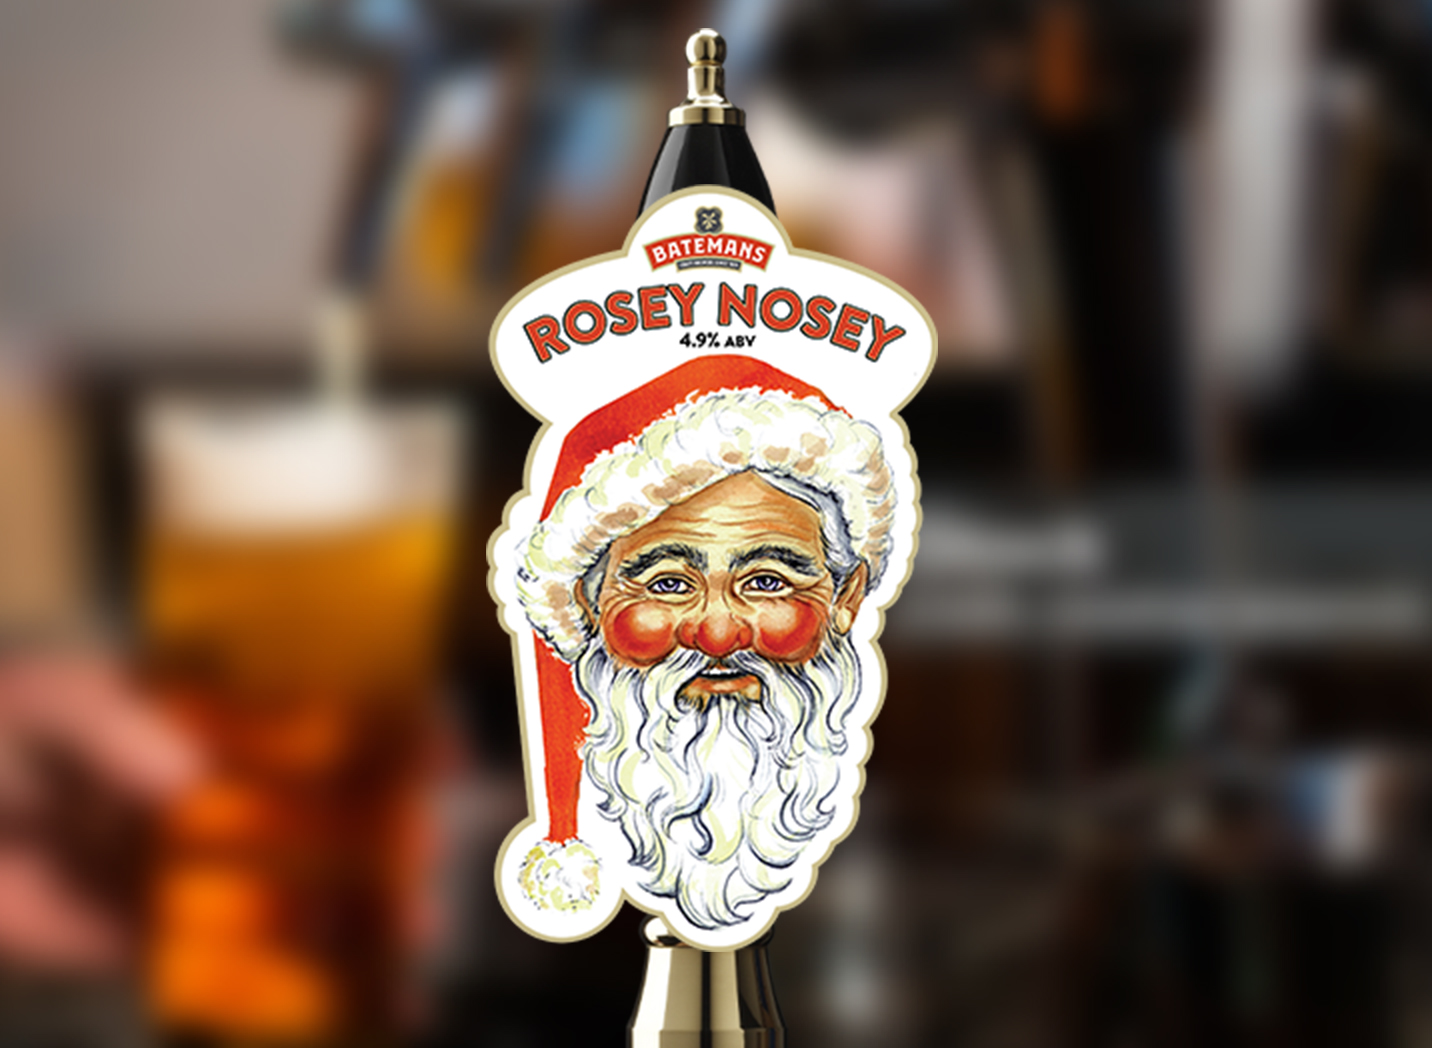 Rosey Nosey Christmas Ale from Batemans Brewery